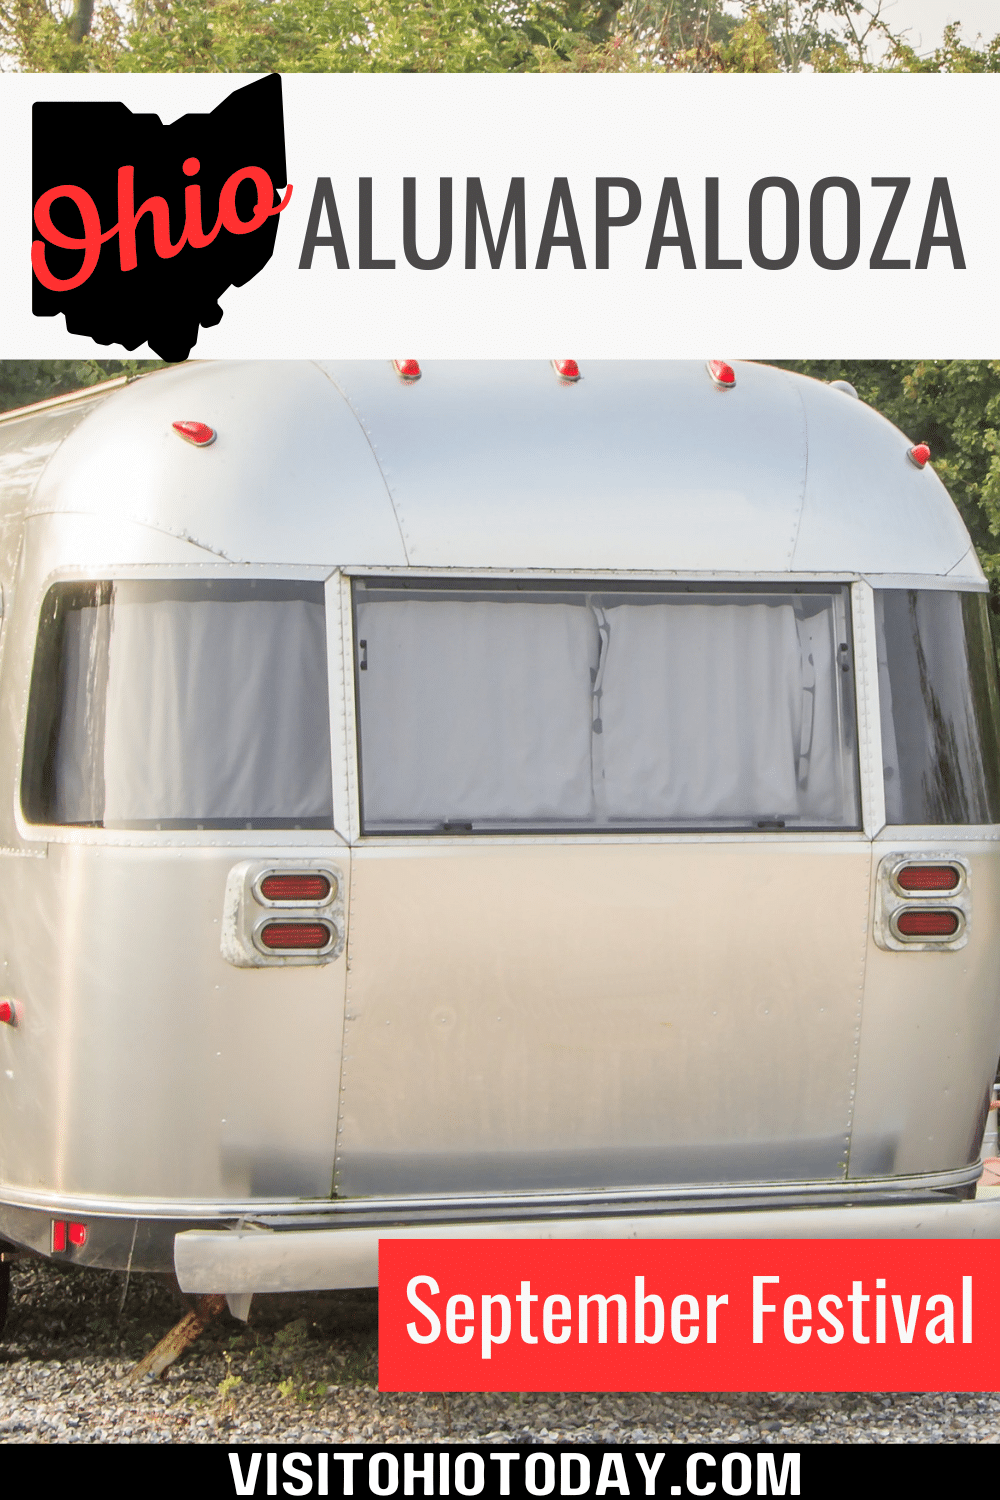 Alumapalooza is an annual event held at the Airstream, Inc. factory in Jackson Center. This is generally an RV festival, including camping, seminars, and of course, Airstream Travel Trailer Factory Tours.